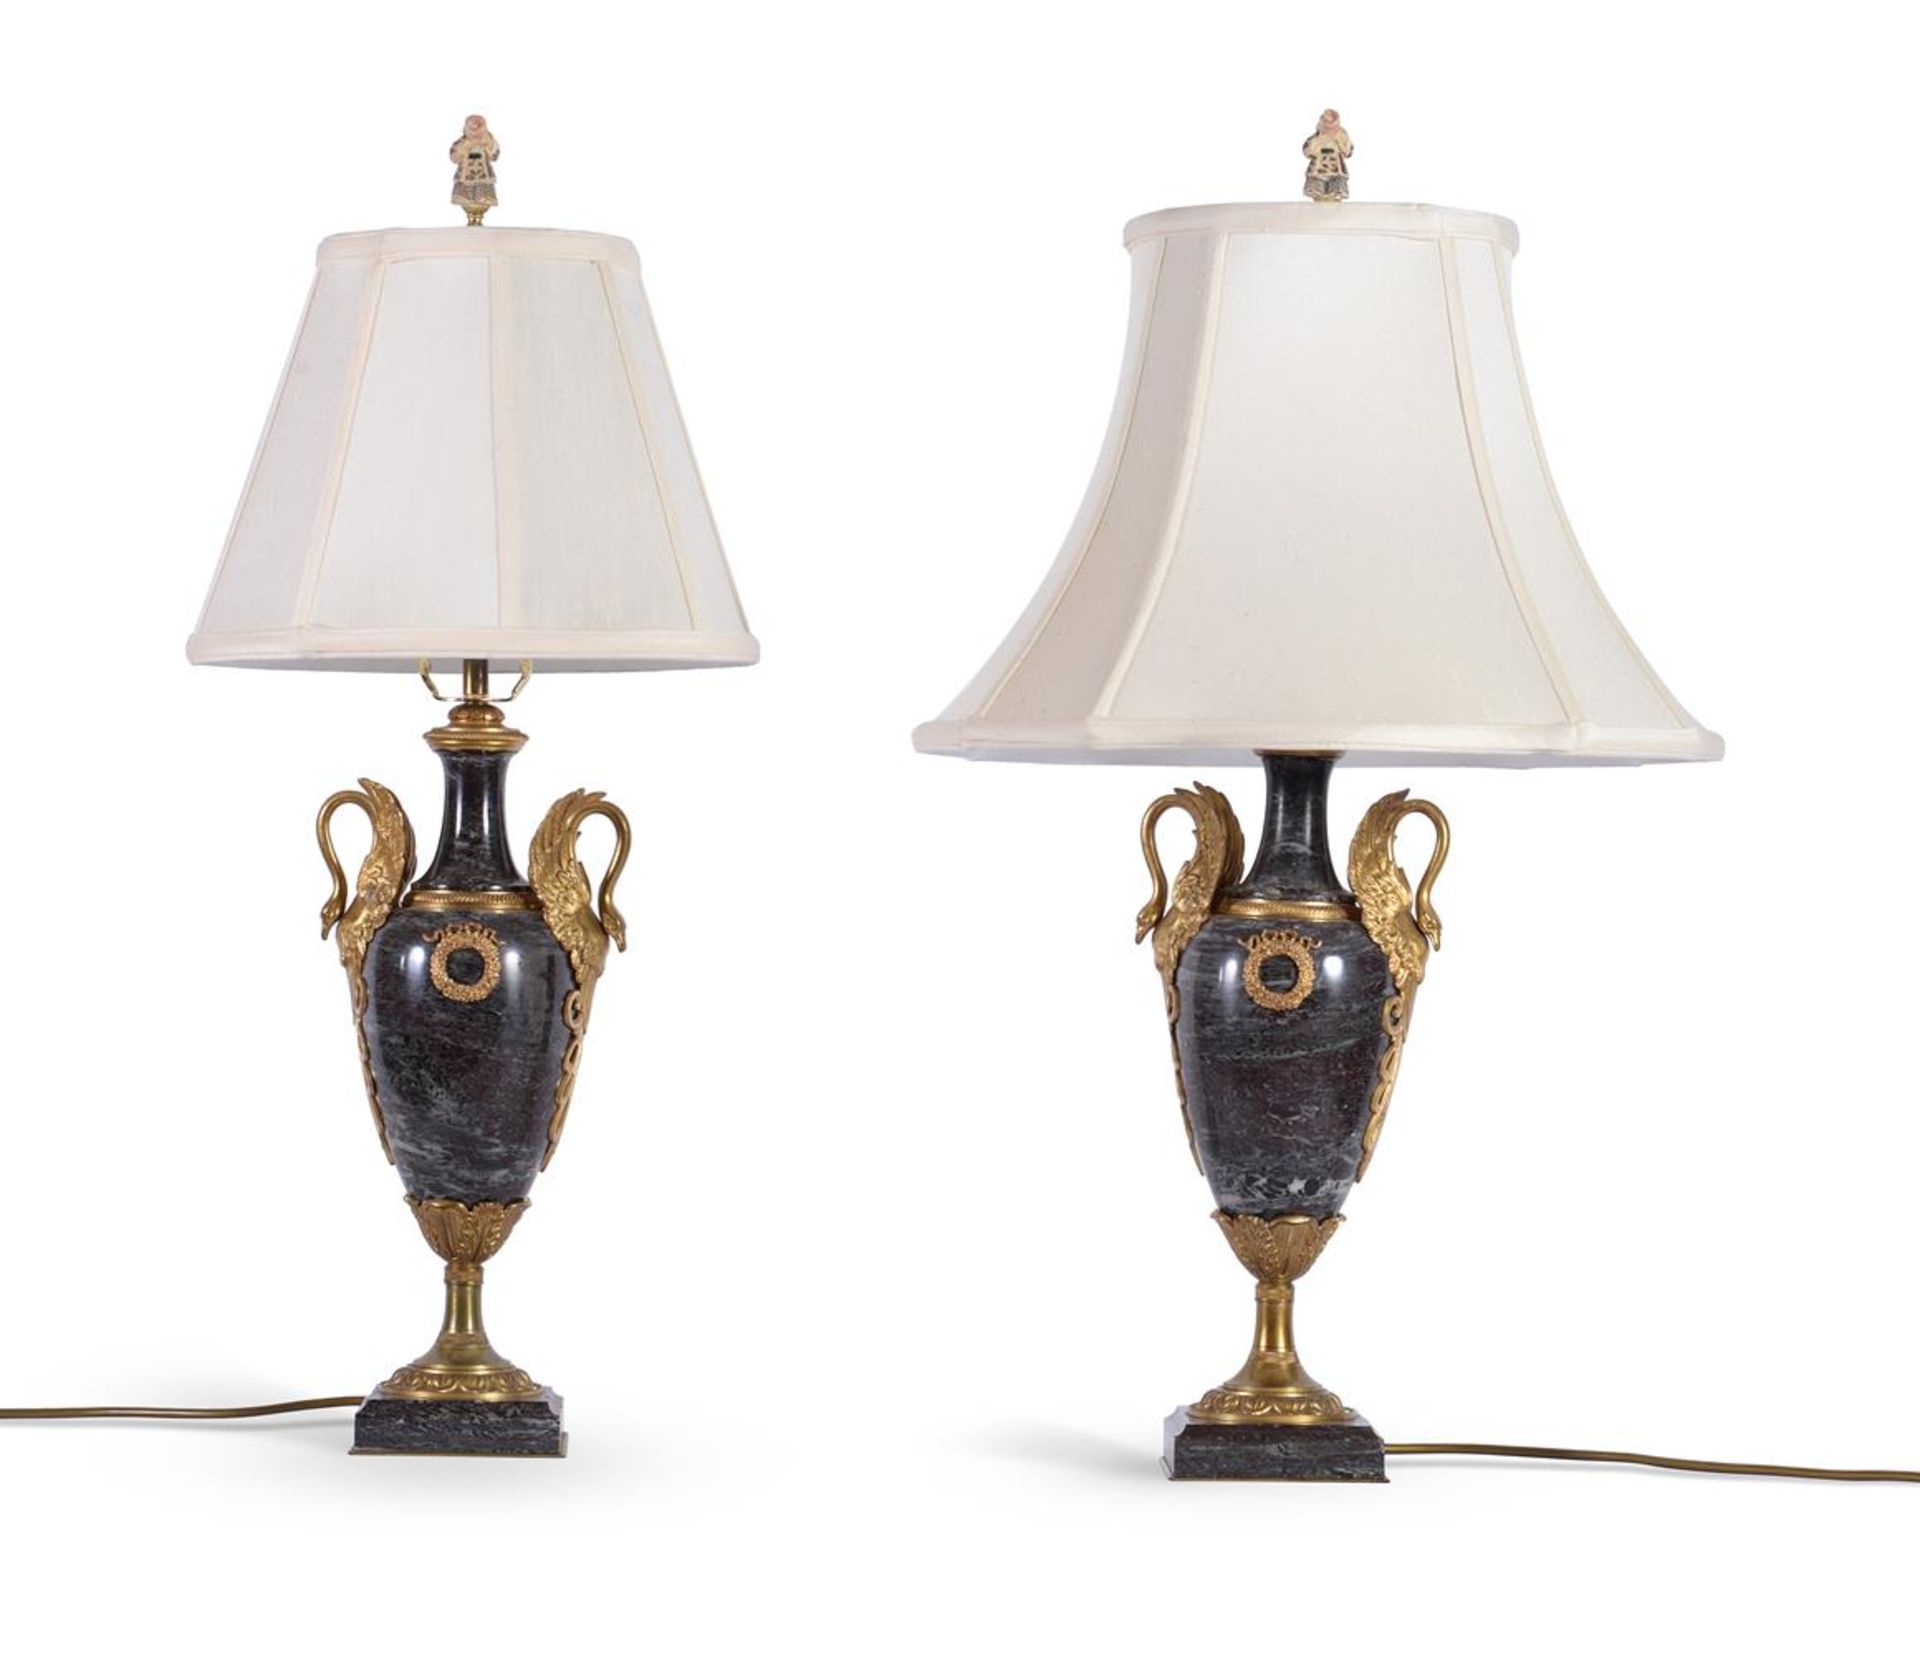 A PAIR OF MARBLE AND GILT BRONZE MOUNTED LAMP BASES, IN THE EMPIRE MANNER, 20TH CENTURY